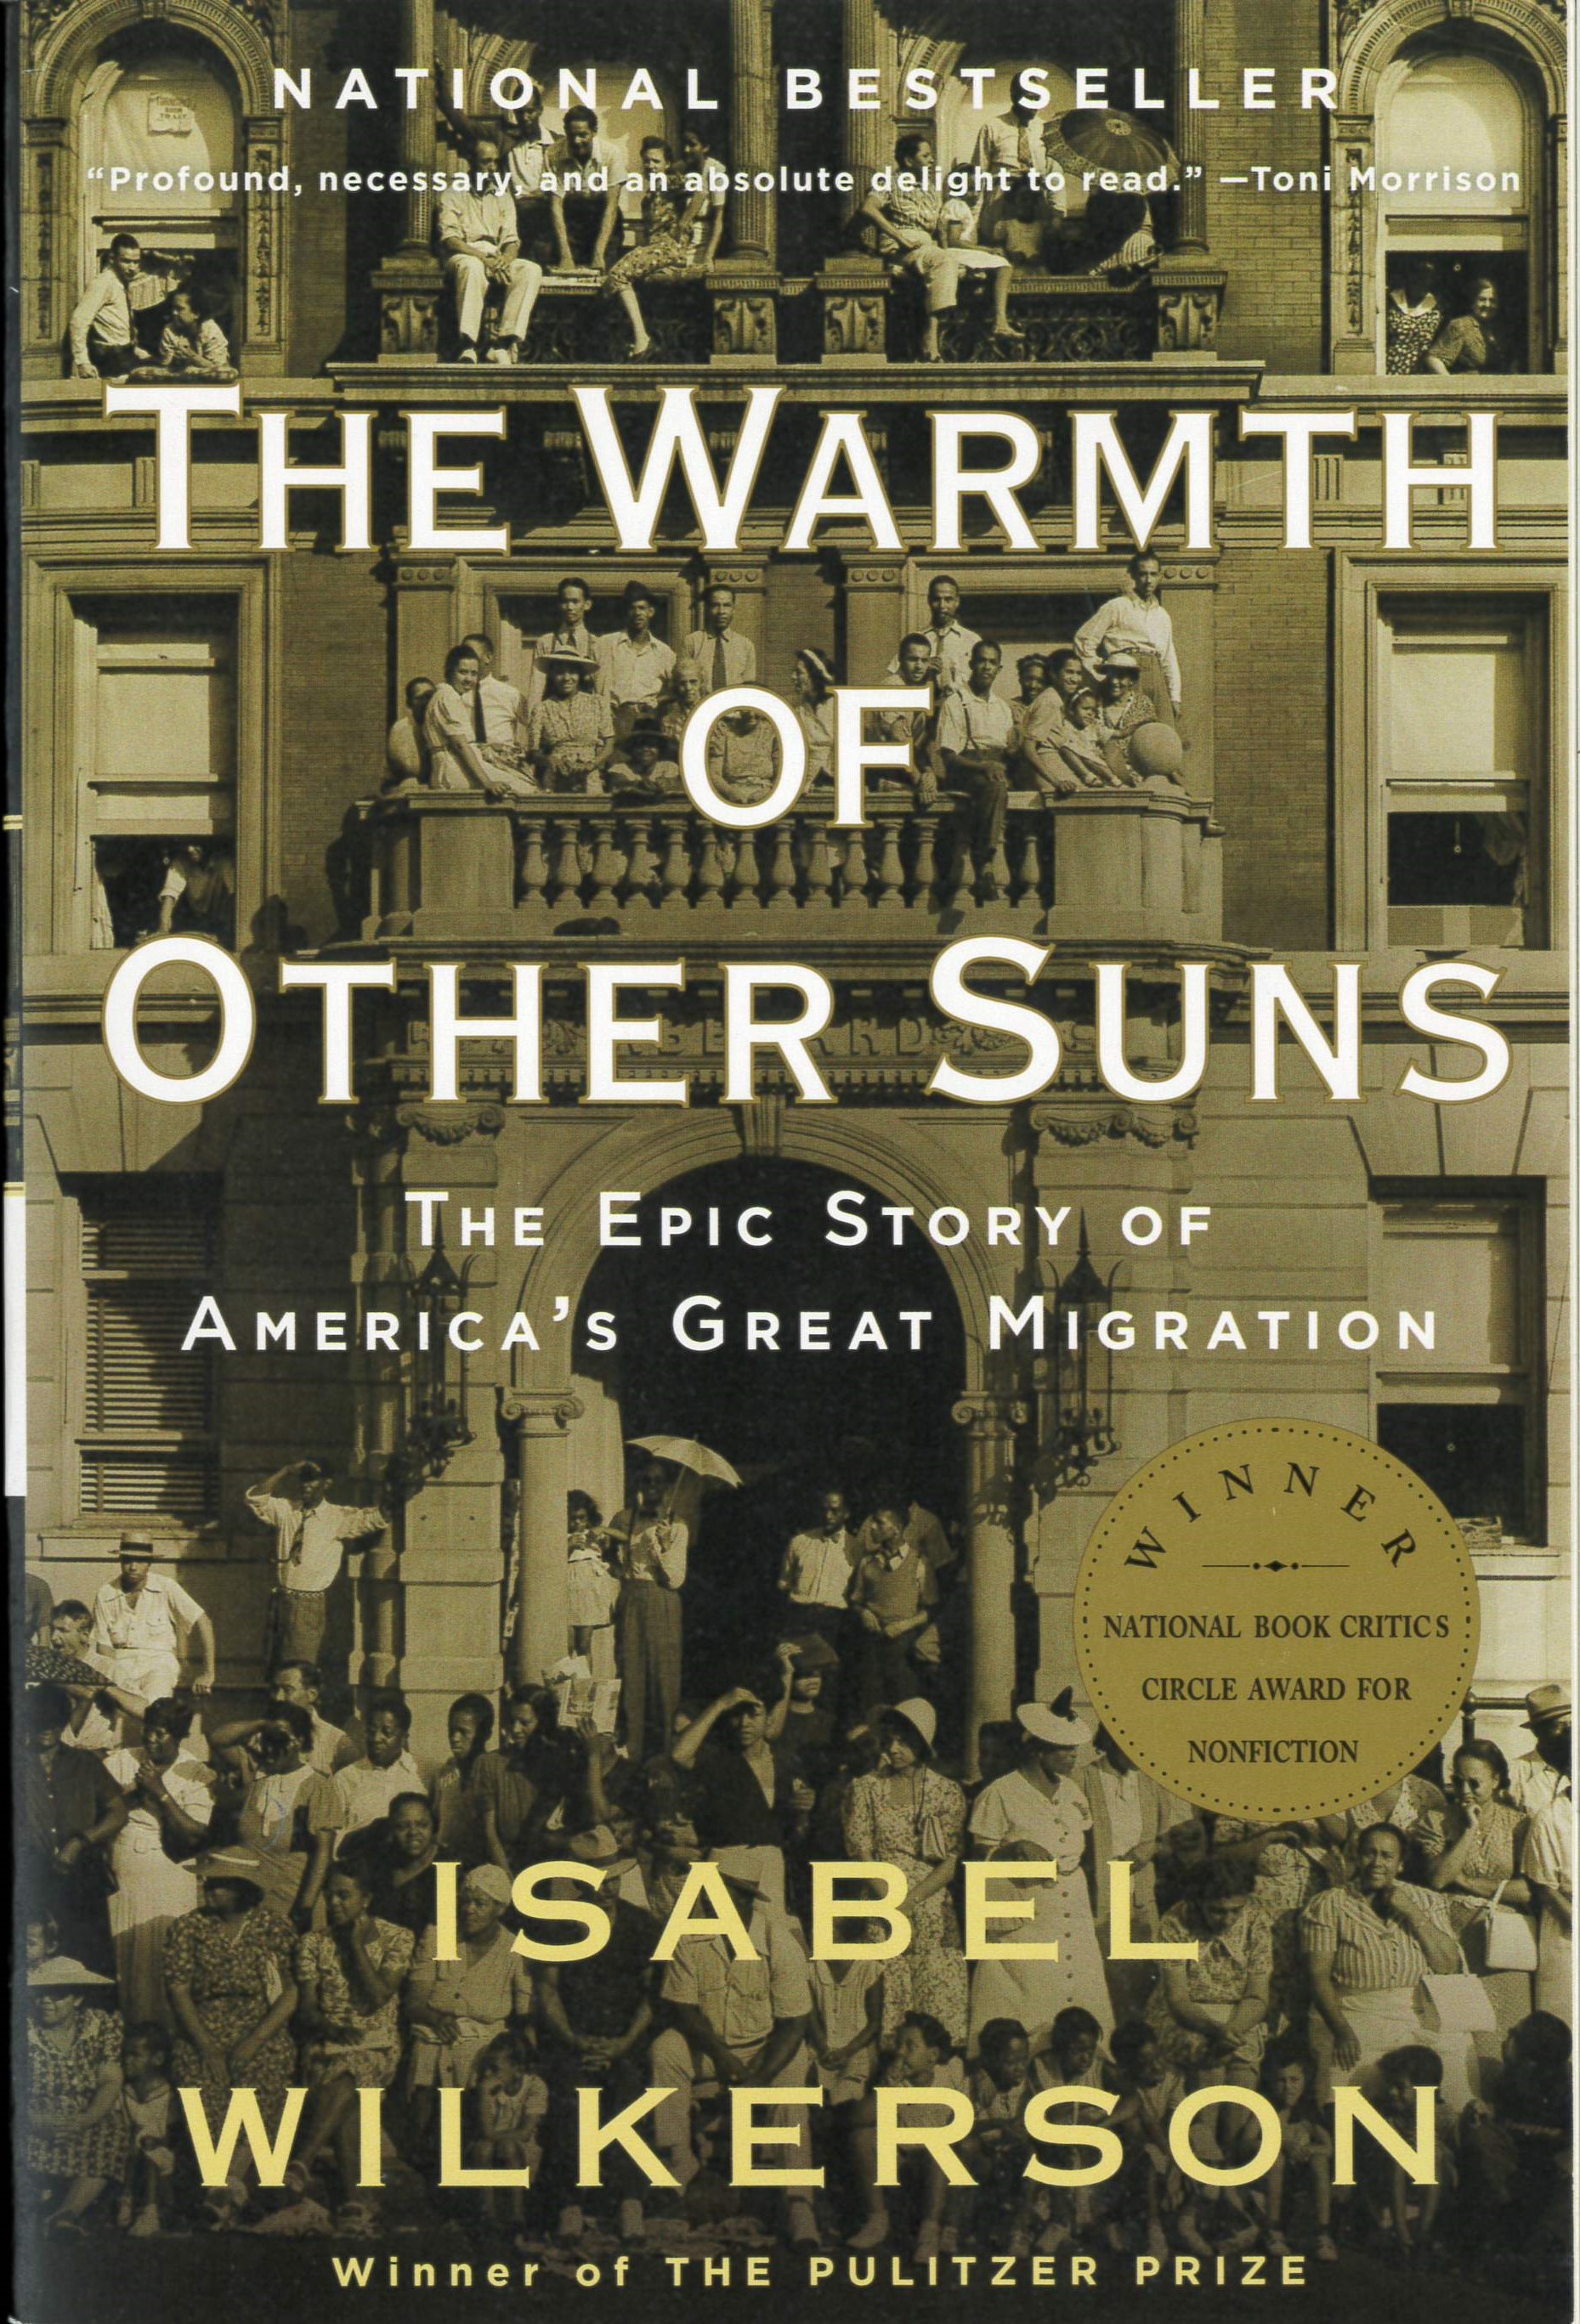 The warmth of other suns : the epic story of America